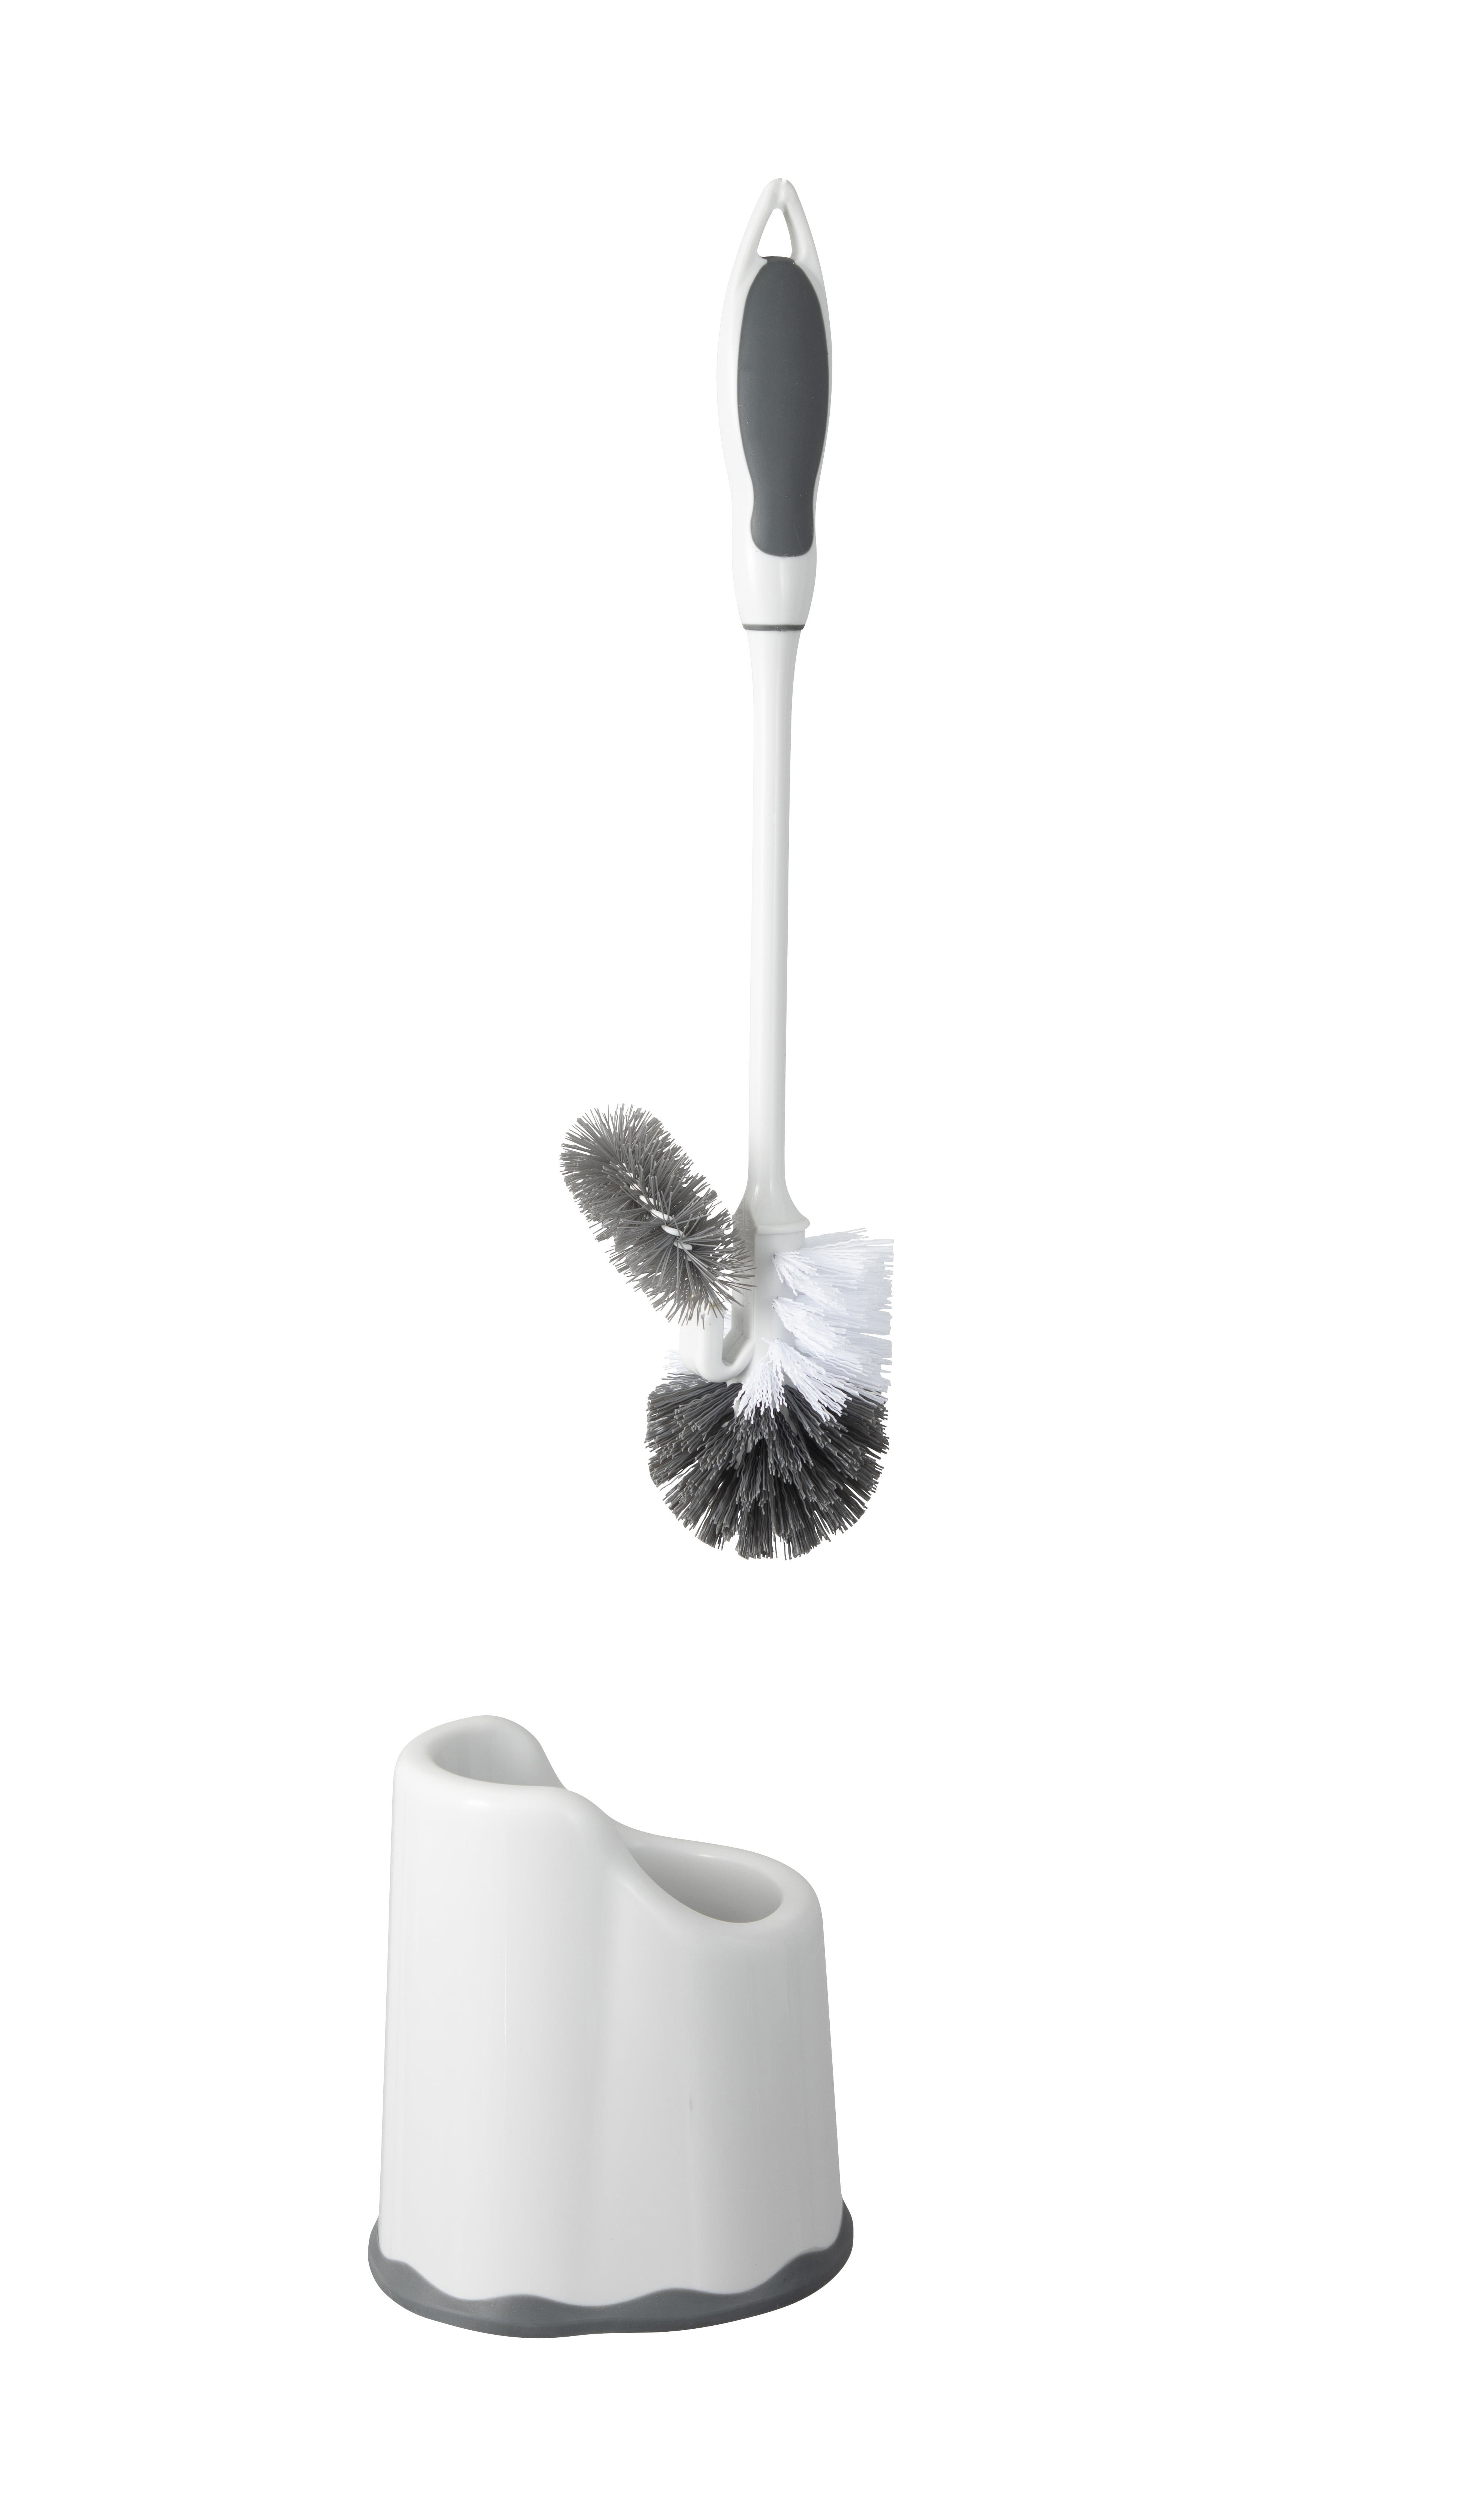 Travelwant Slim Compact Bathroom Toilet Bowl Brush, Toilet Brush and  Holder,Toilet Bowl Cleaning System with Scrubbing Wand, Under Rim Lip Brush  and Storage Caddy for Bathroom 